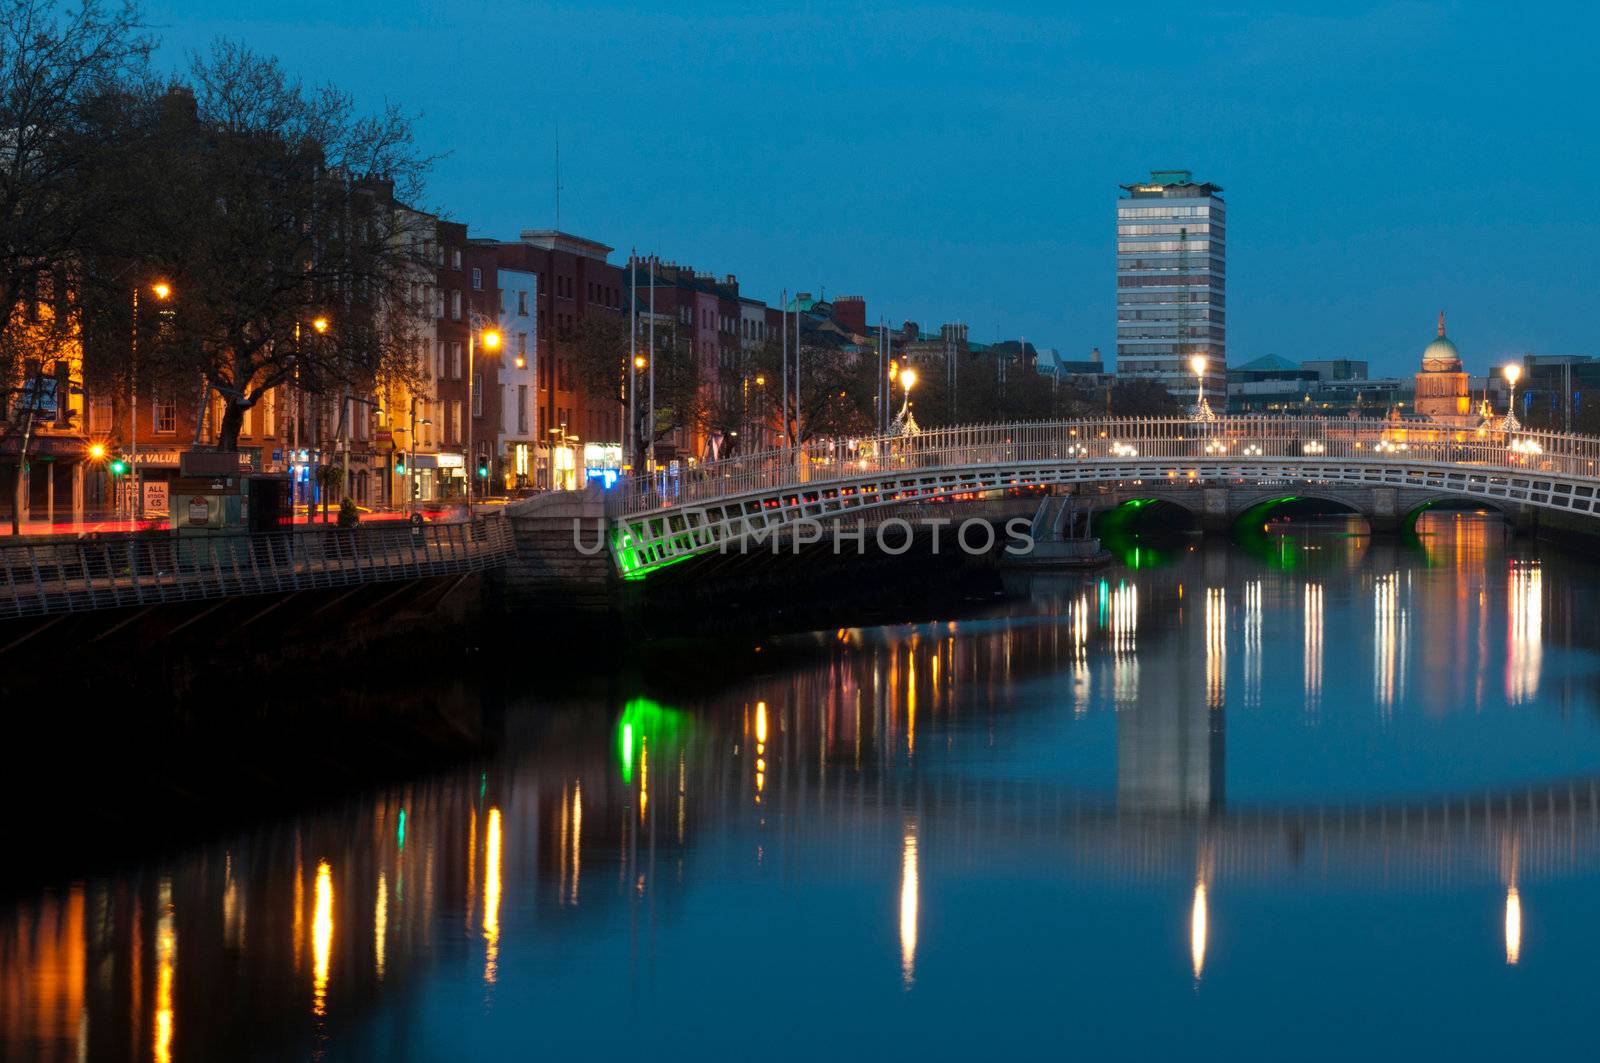 stunning nightscene with Ha'penny bridge and Liffey river, the Custom House landmark at the background (picture taken after sunset)